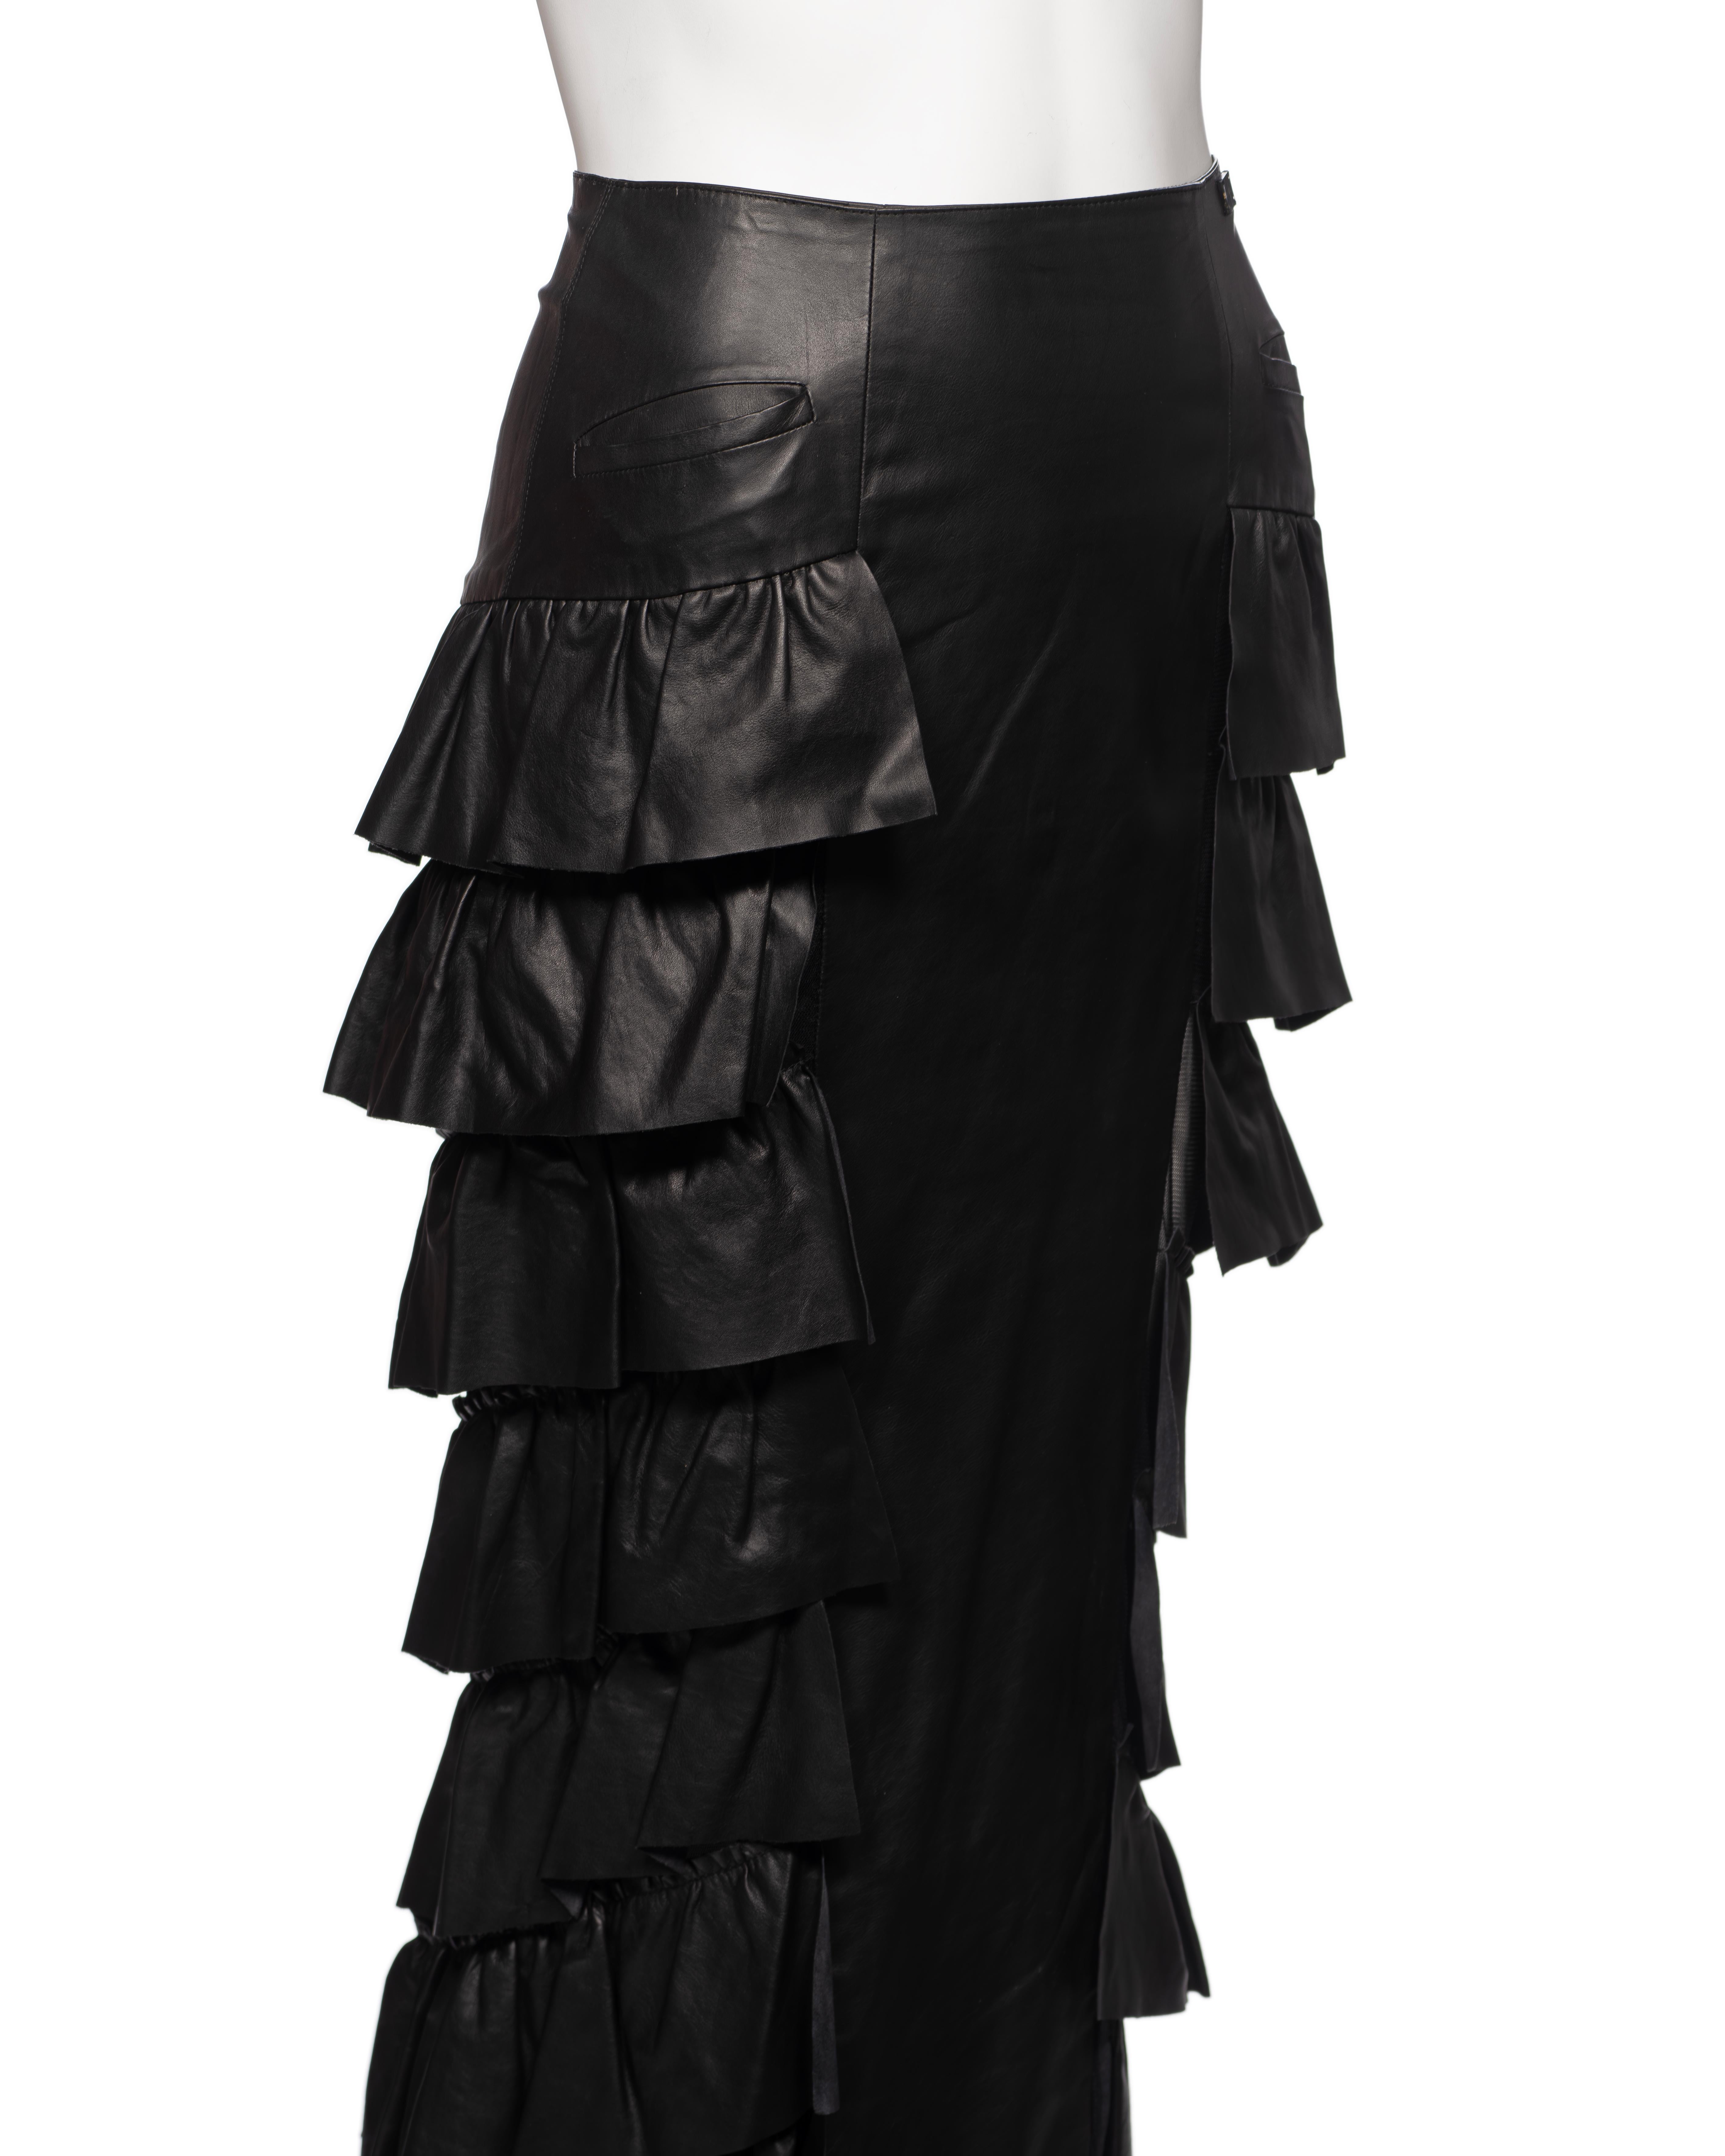 Chanel by Karl Lagerfeld Black Leather Tiered Ruffled Maxi Skirt, FW 2001 For Sale 3